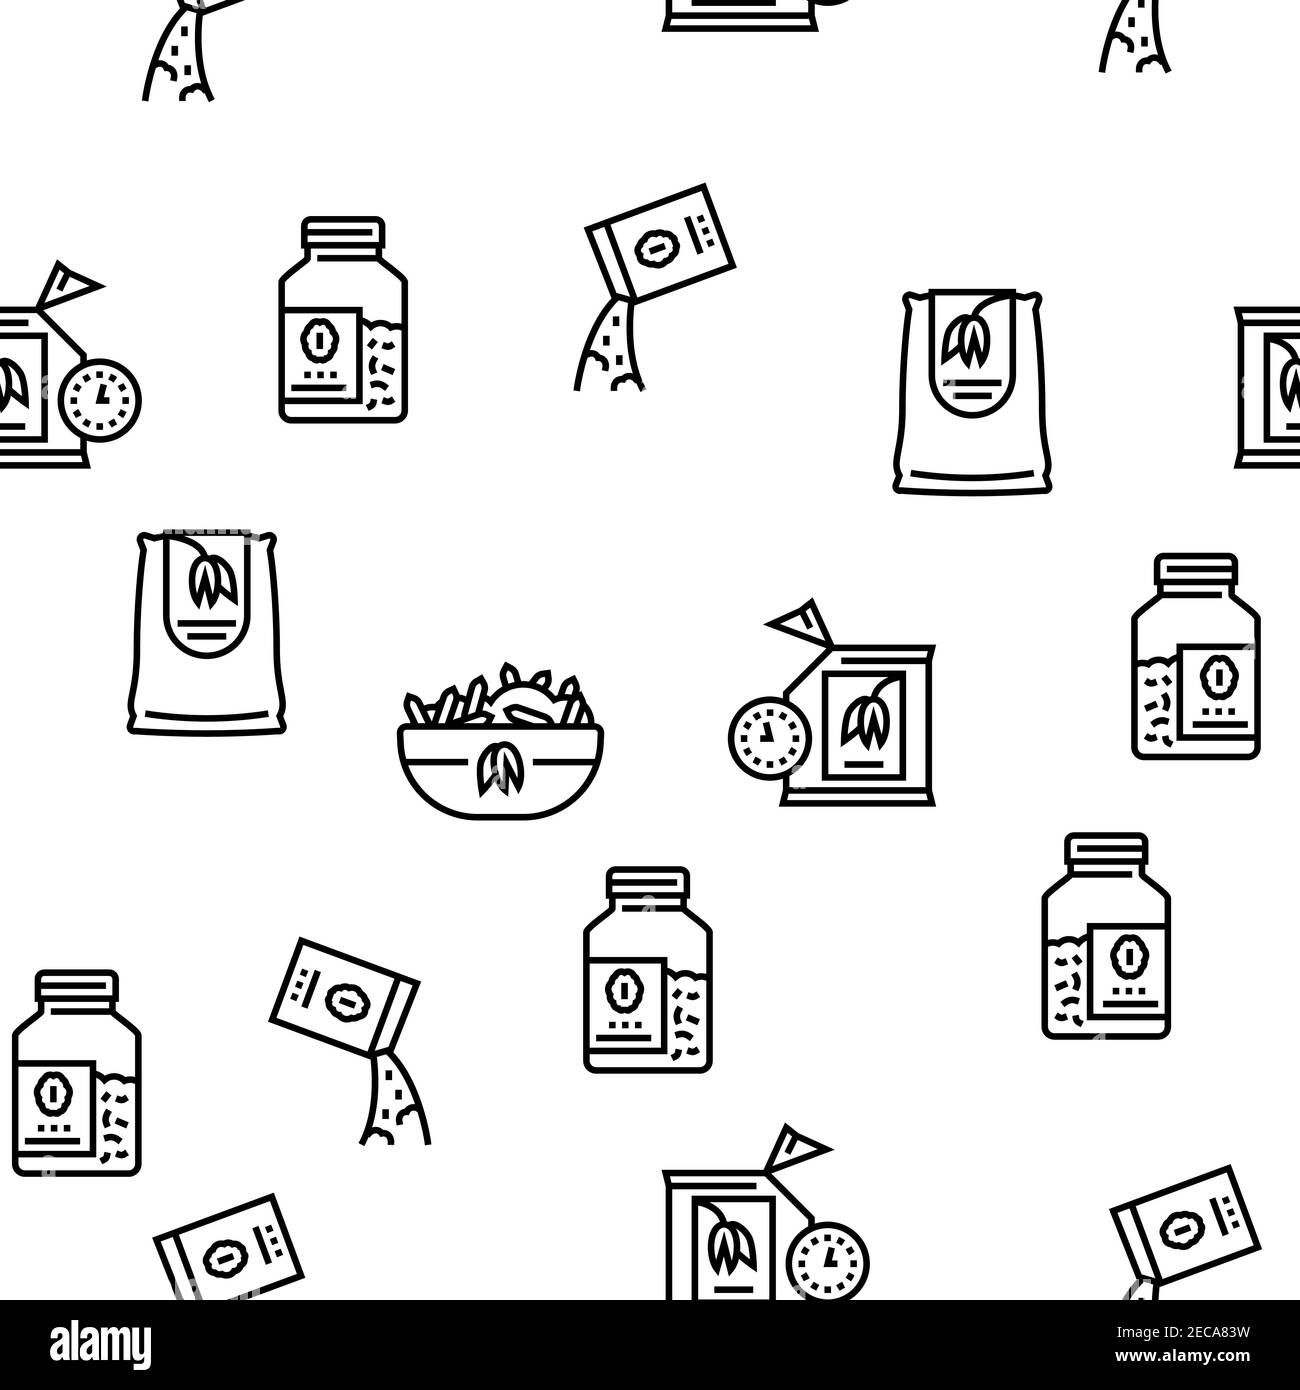 Oatmeal Nutrition Vector Seamless Pattern Stock Vector